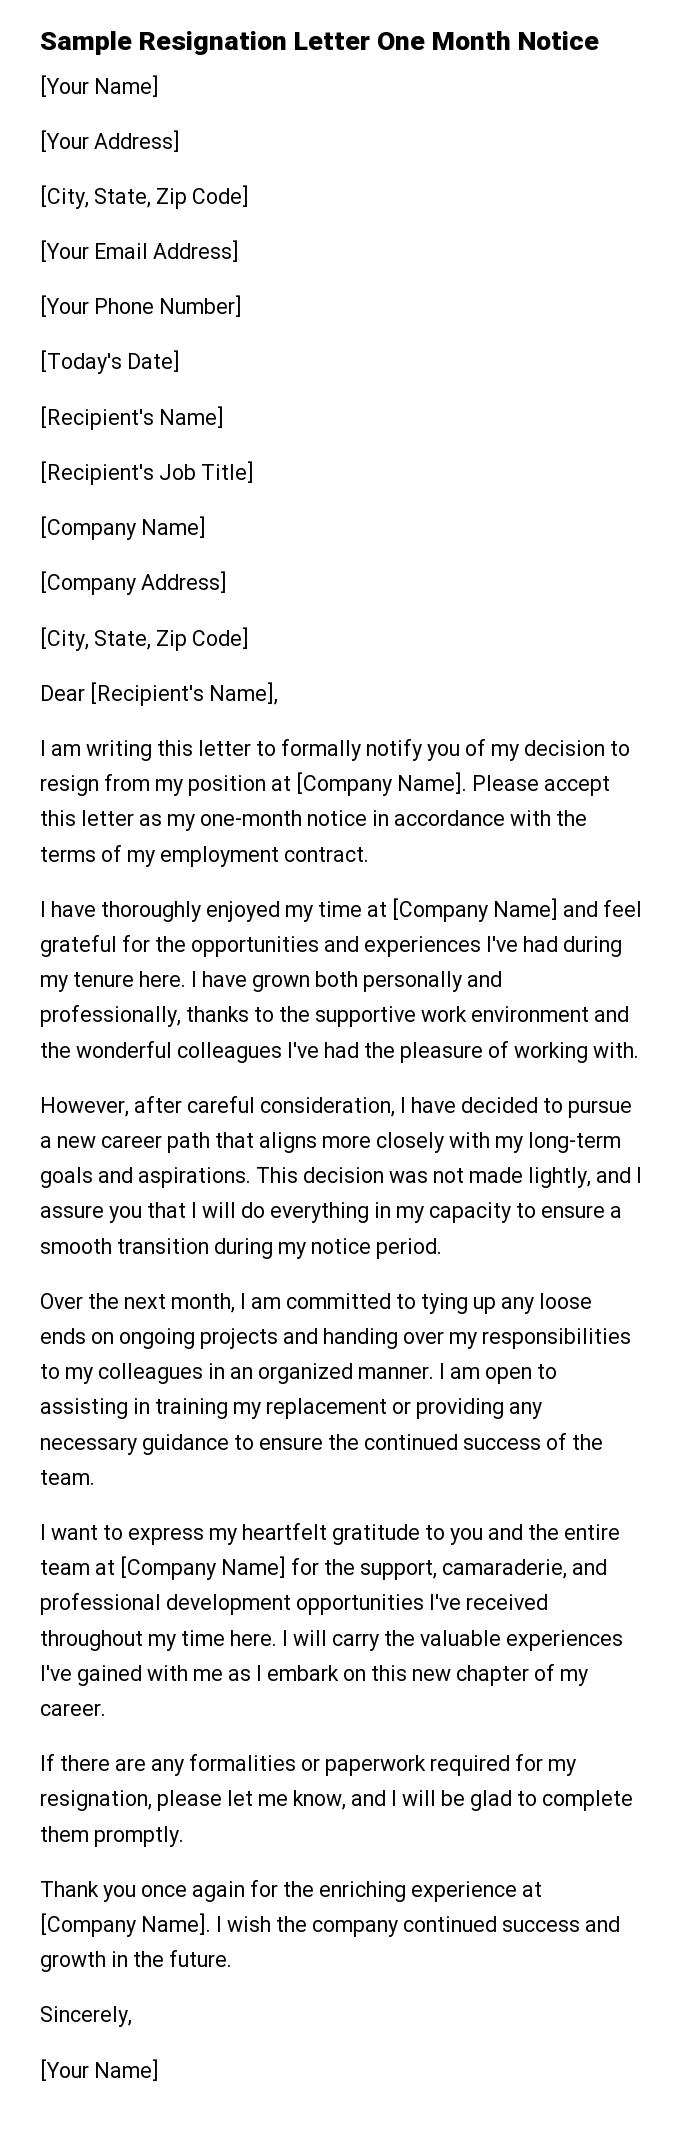 Sample Resignation Letter One Month Notice